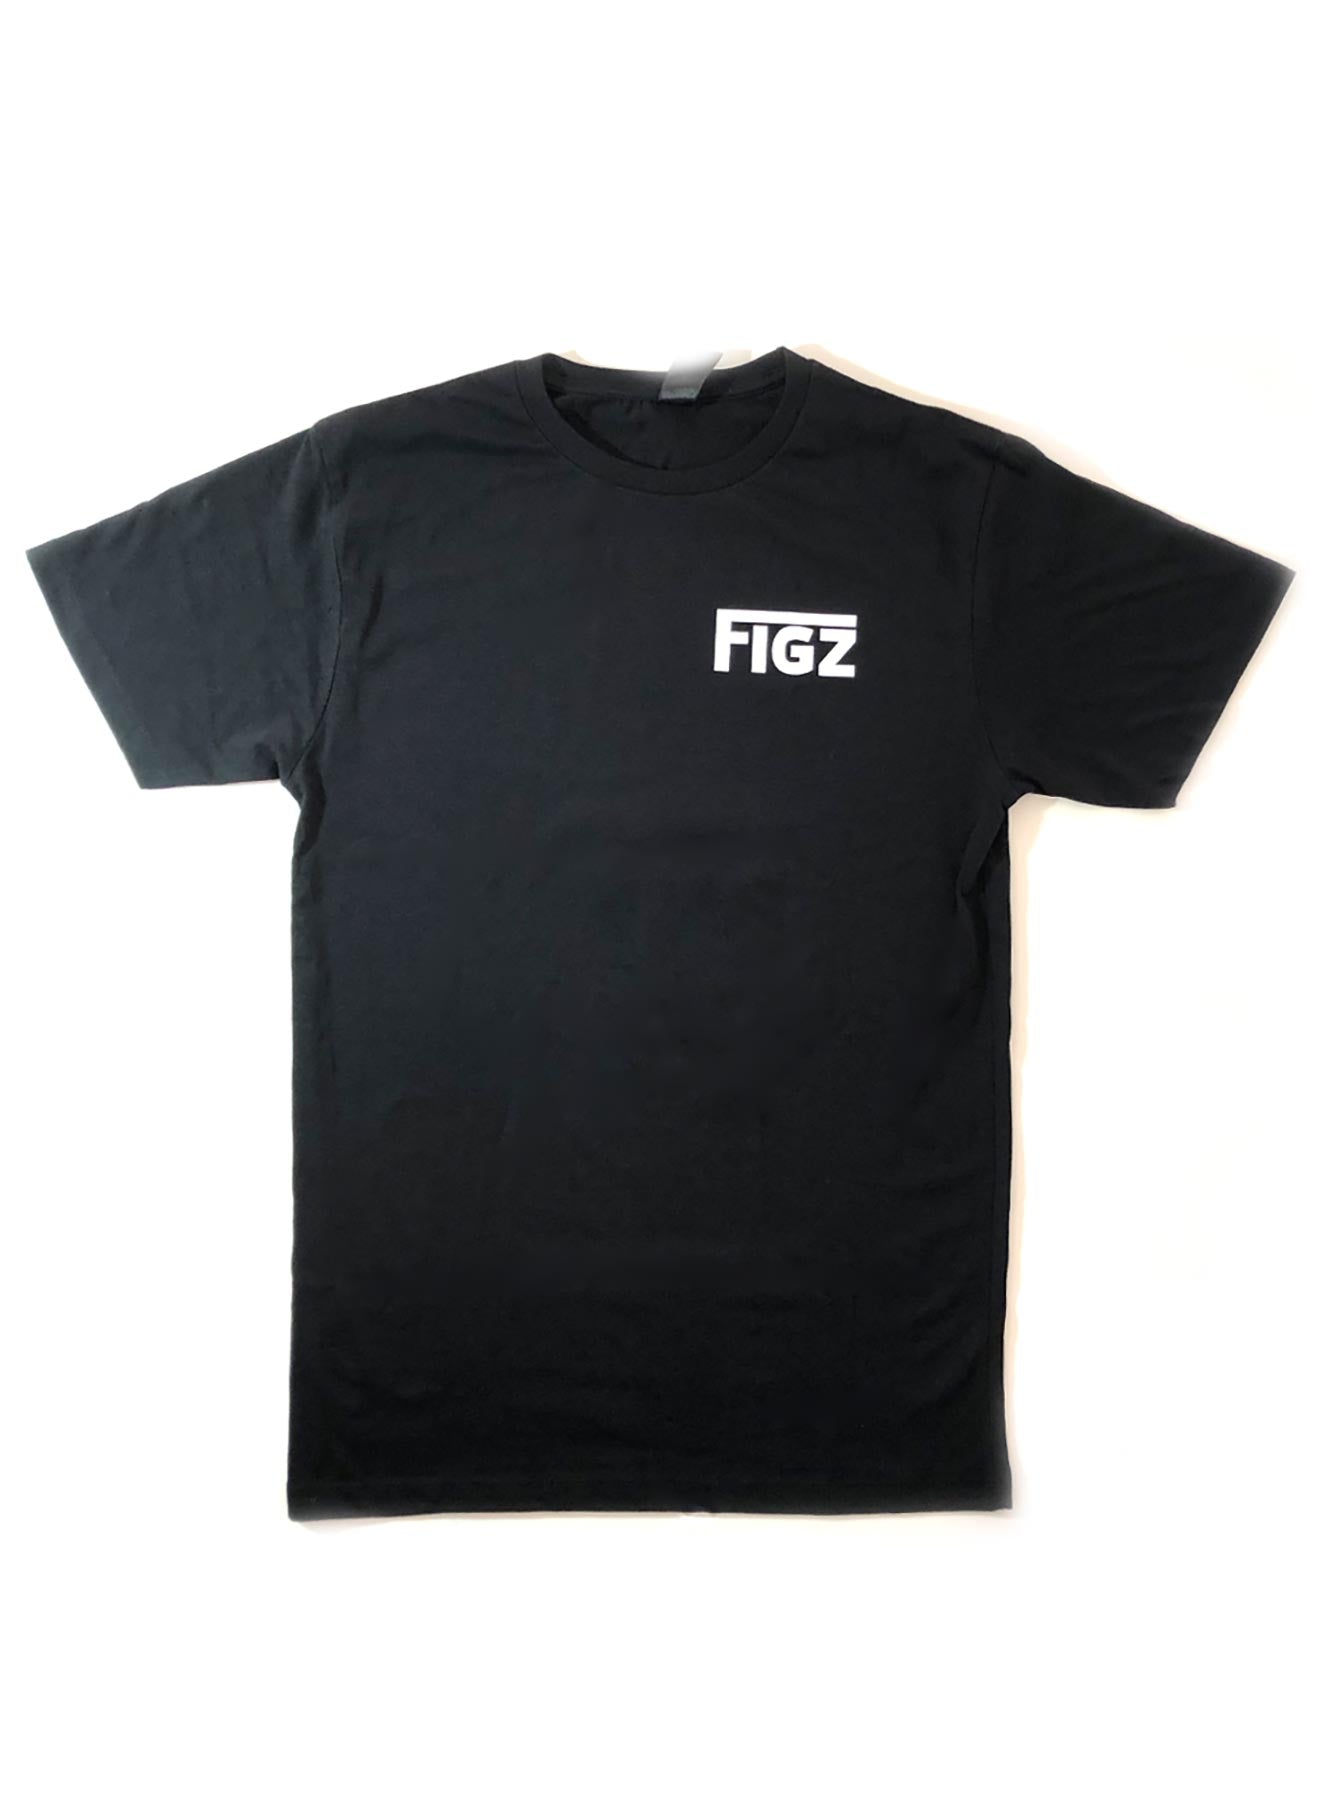 Figz Penguin | T-Shirt (Youth + Adult)